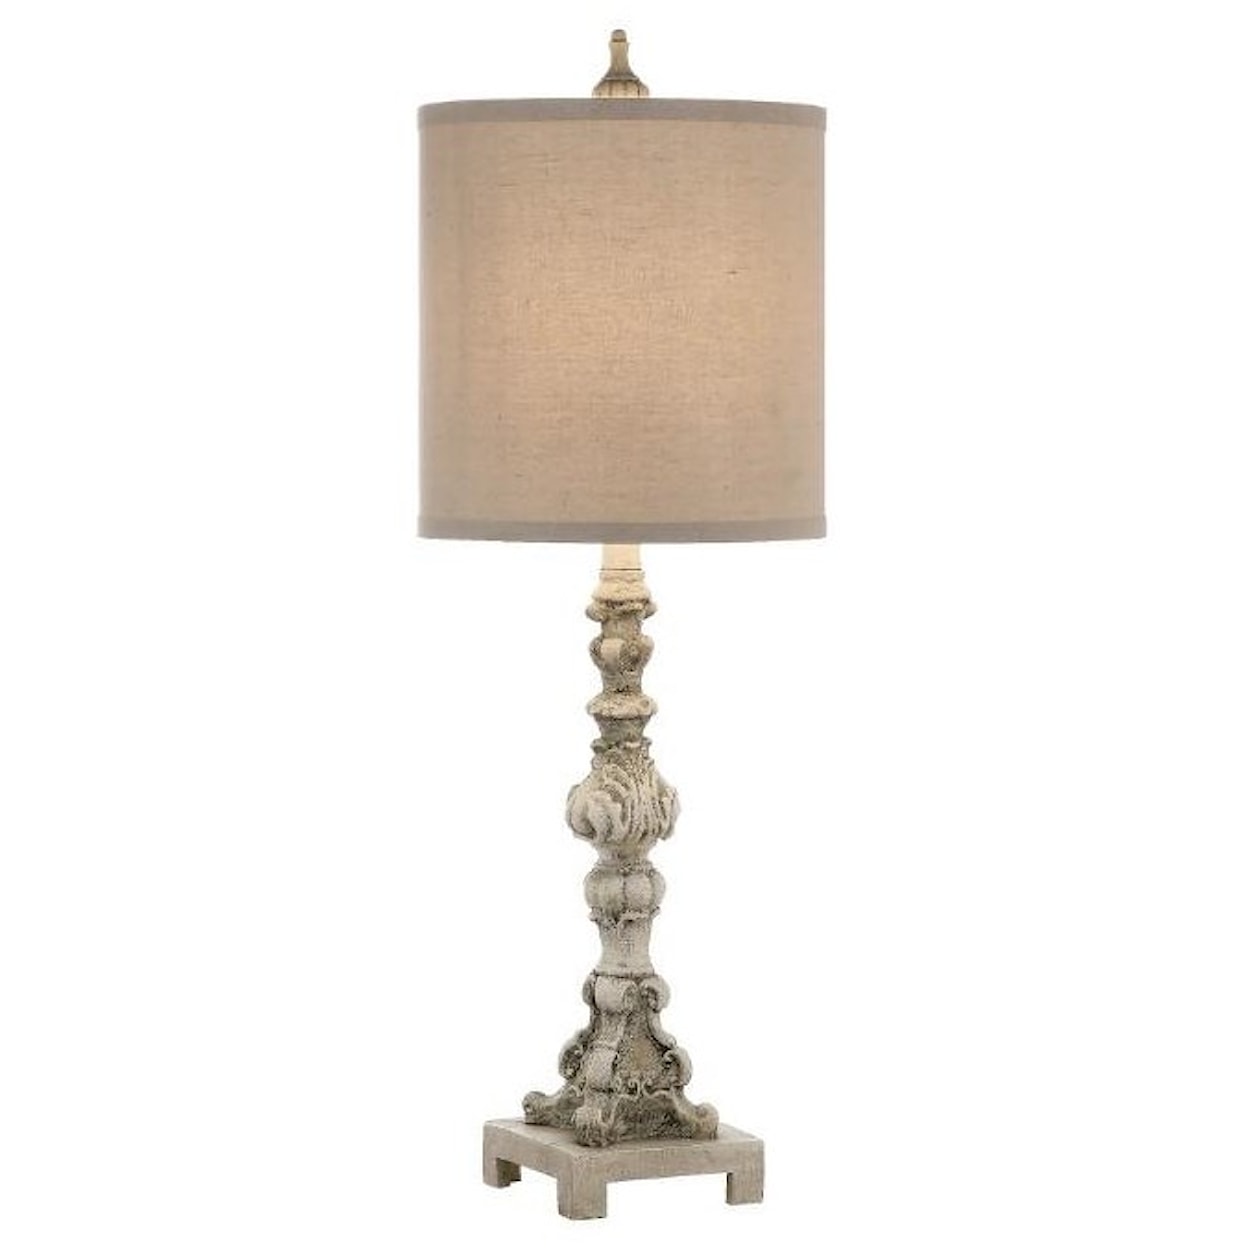 Crestview Collection Lighting Turner Table Lamp